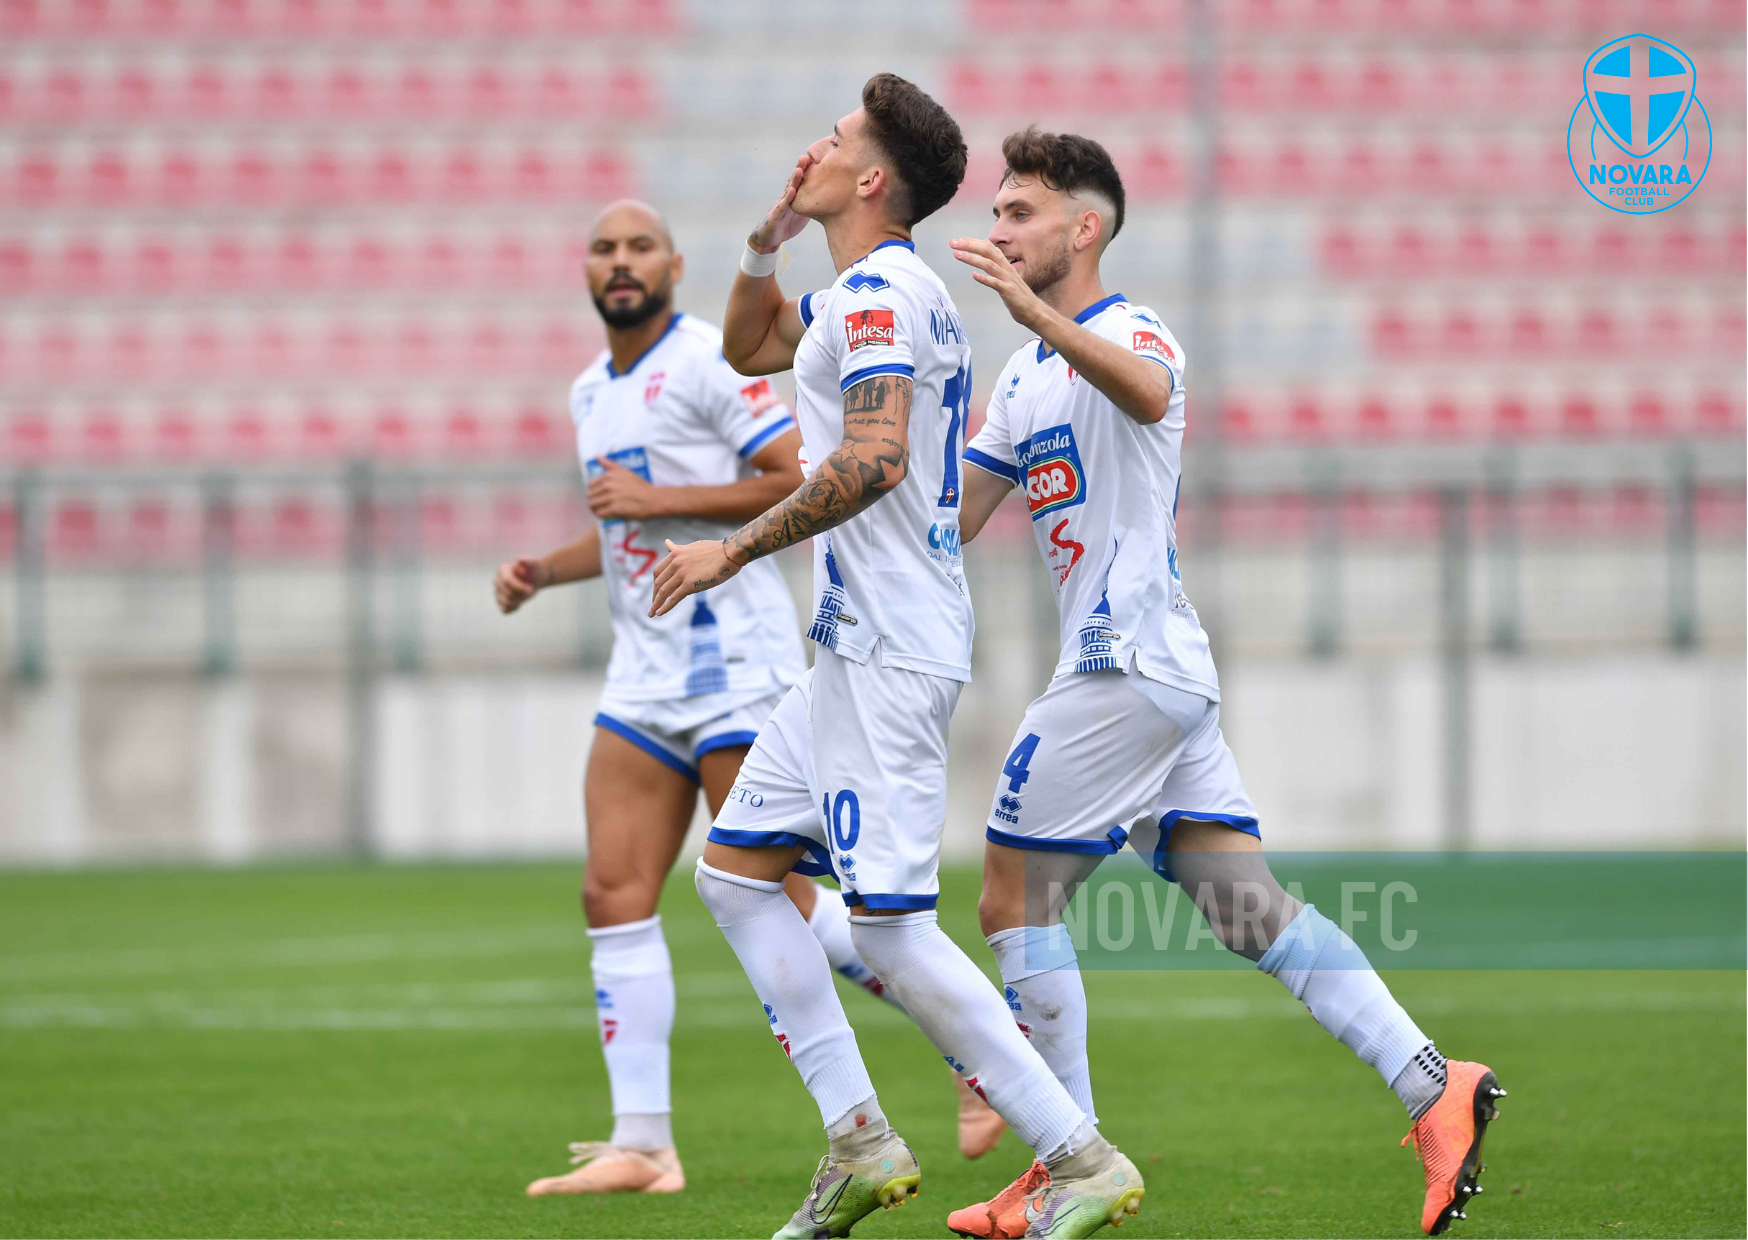 Read more about the article Alessandria-Novara 2-1 | Gallery